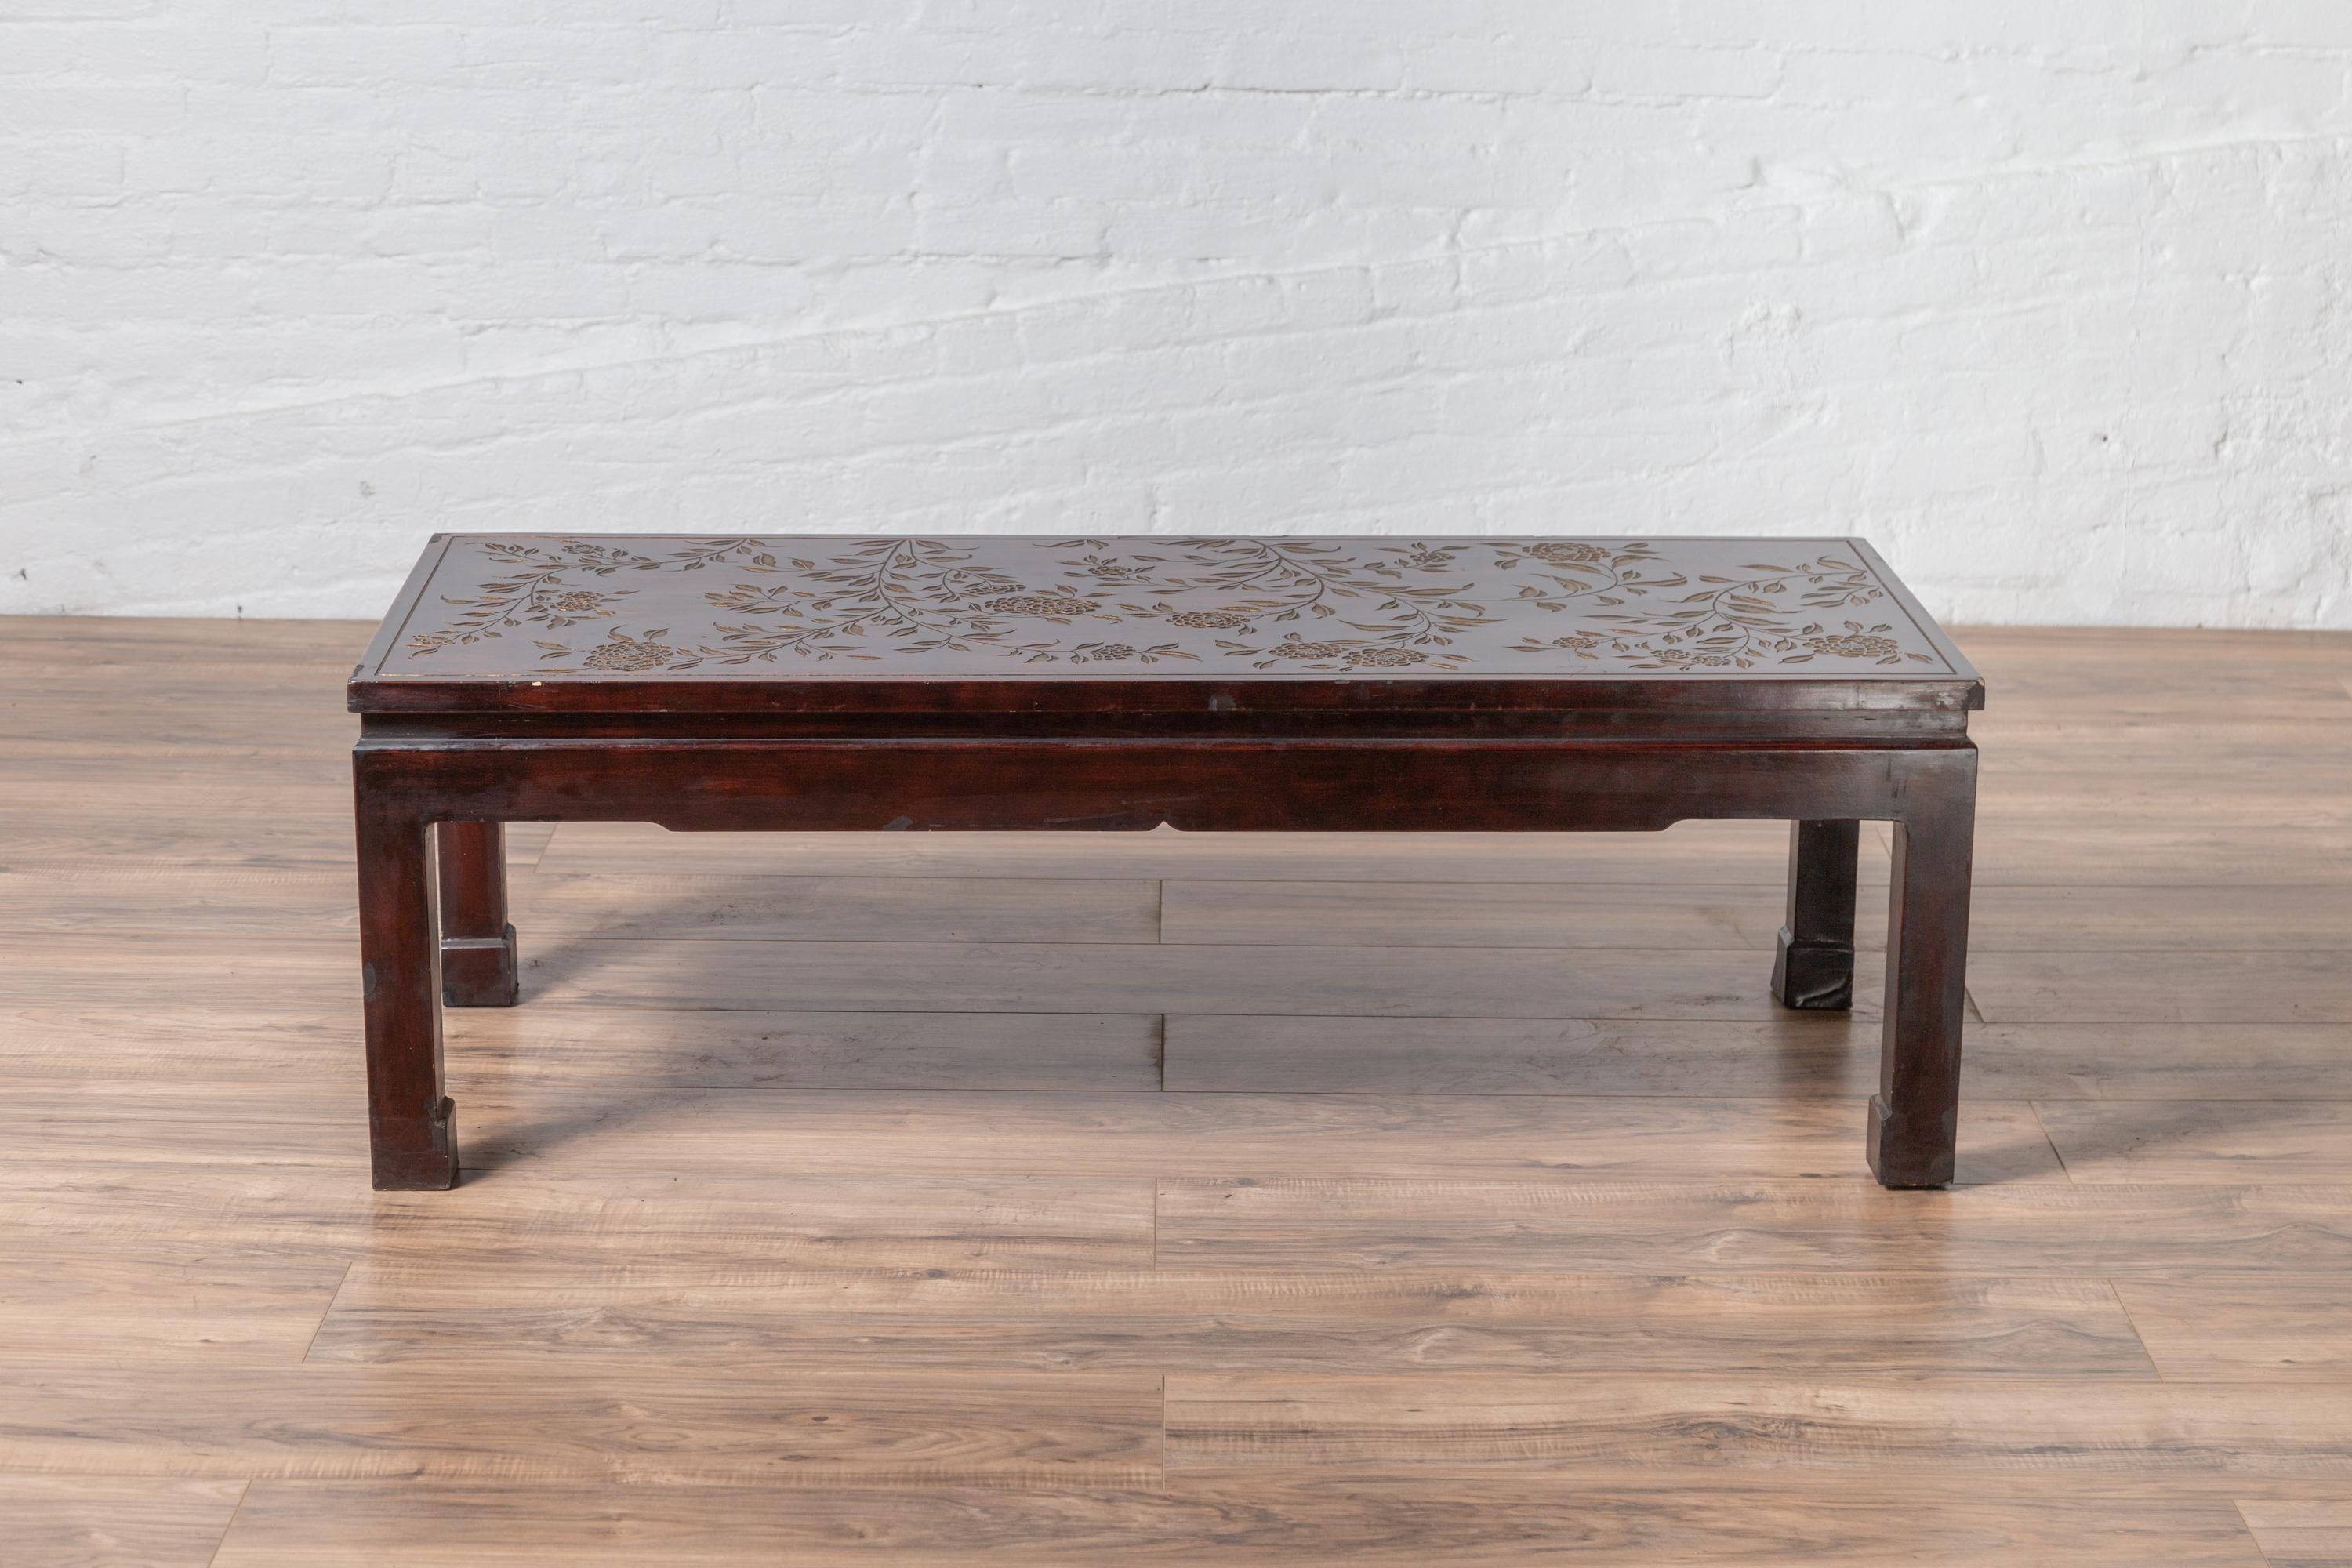 Vintage Chinese Lacquered Coffee Table with Carved and Gilt Floral Décor For Sale 8